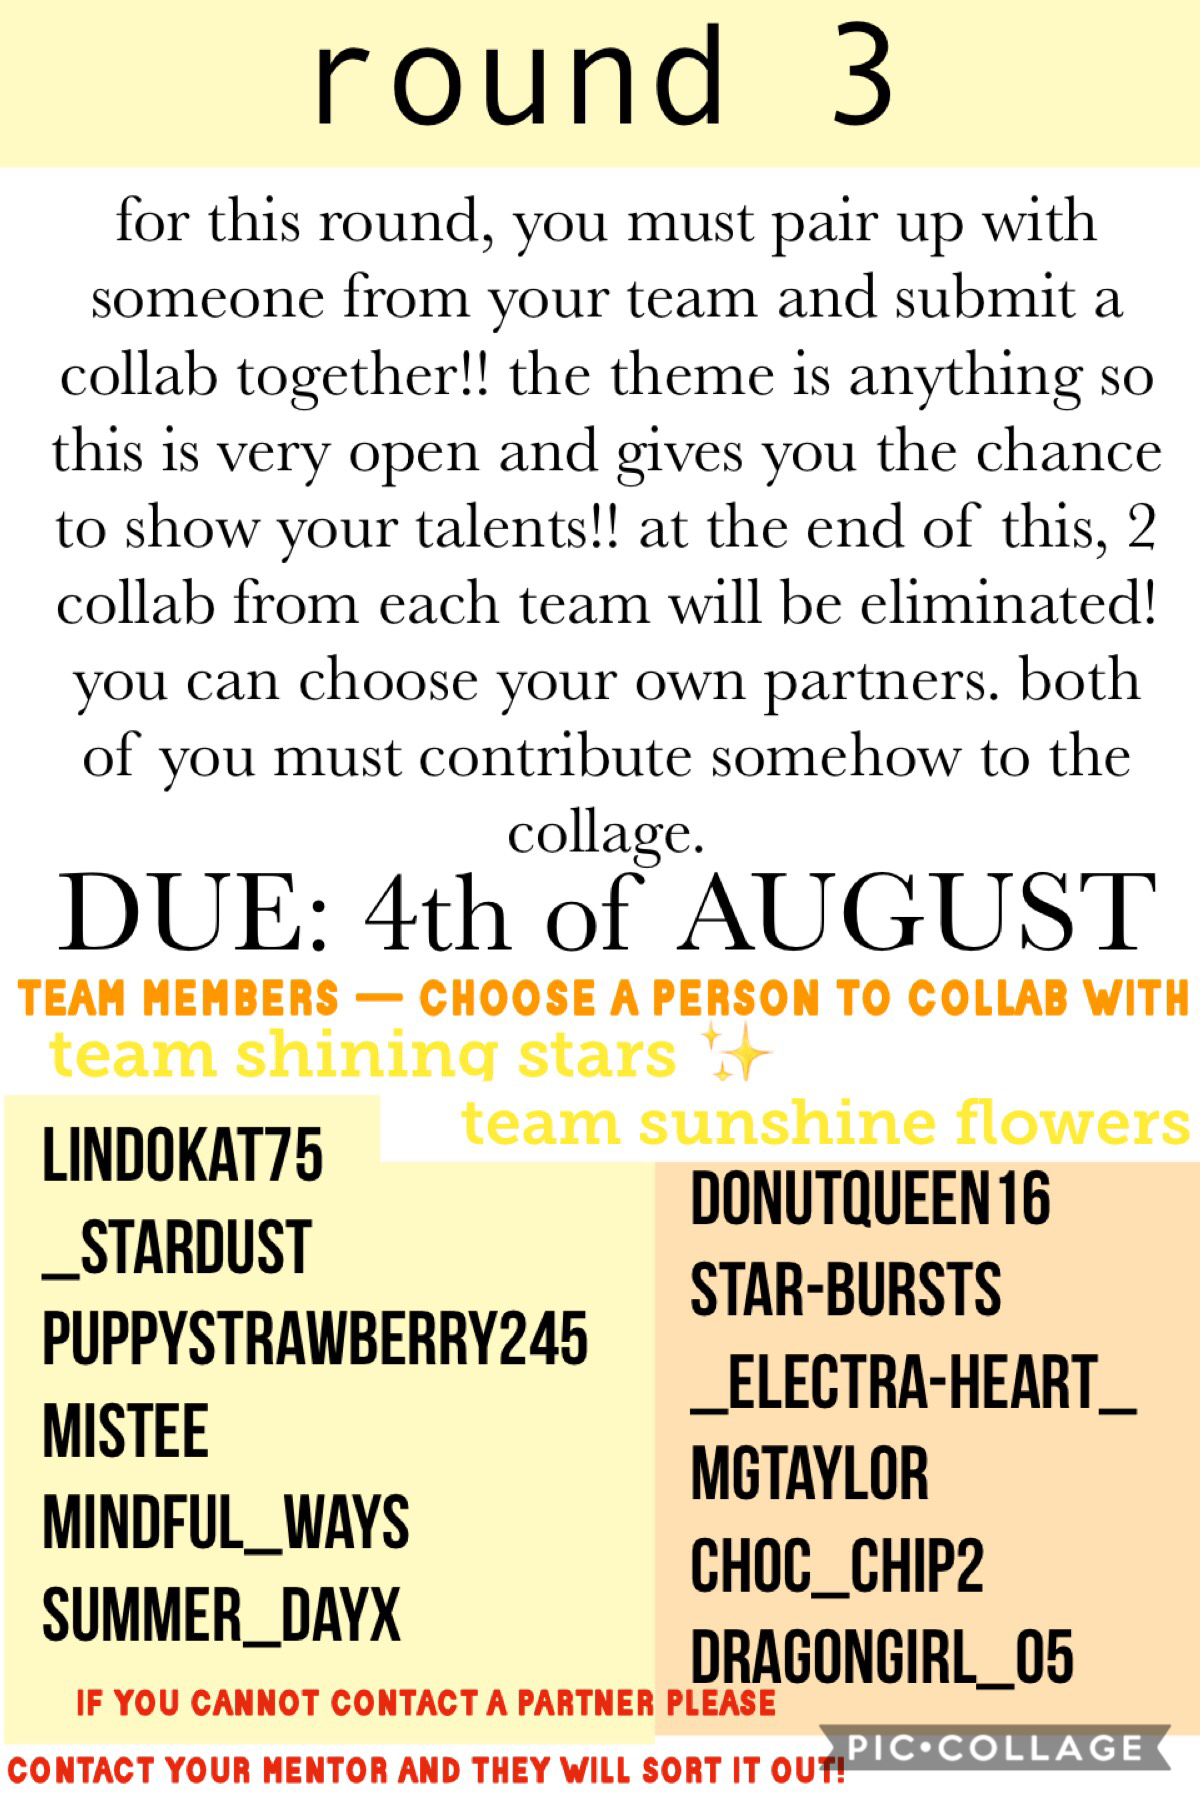 round 3 out now!! if you have trouble finding a partner, just contact meandmeonly (team shining stars) or audreyhepburn24 (team sunshine flowers) for help!